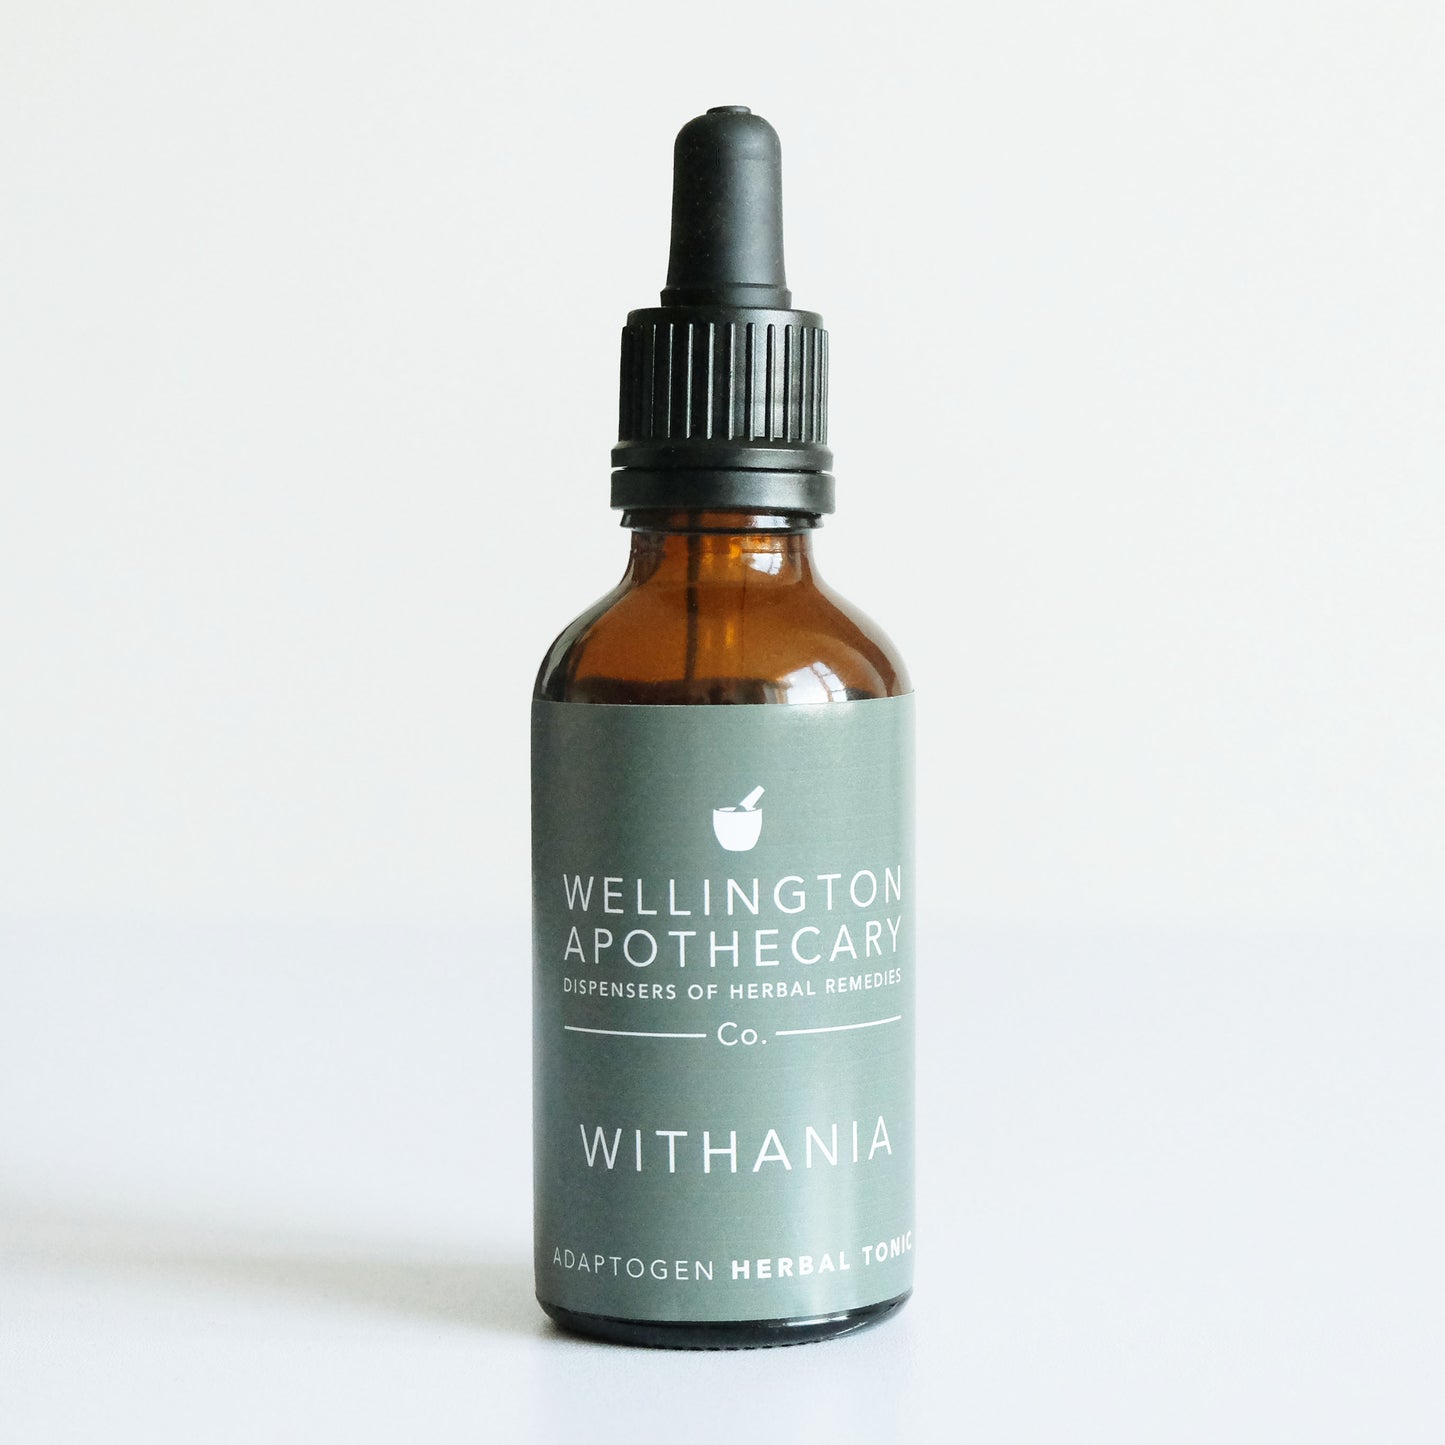 Withania Adaptogen Herbal Tonic